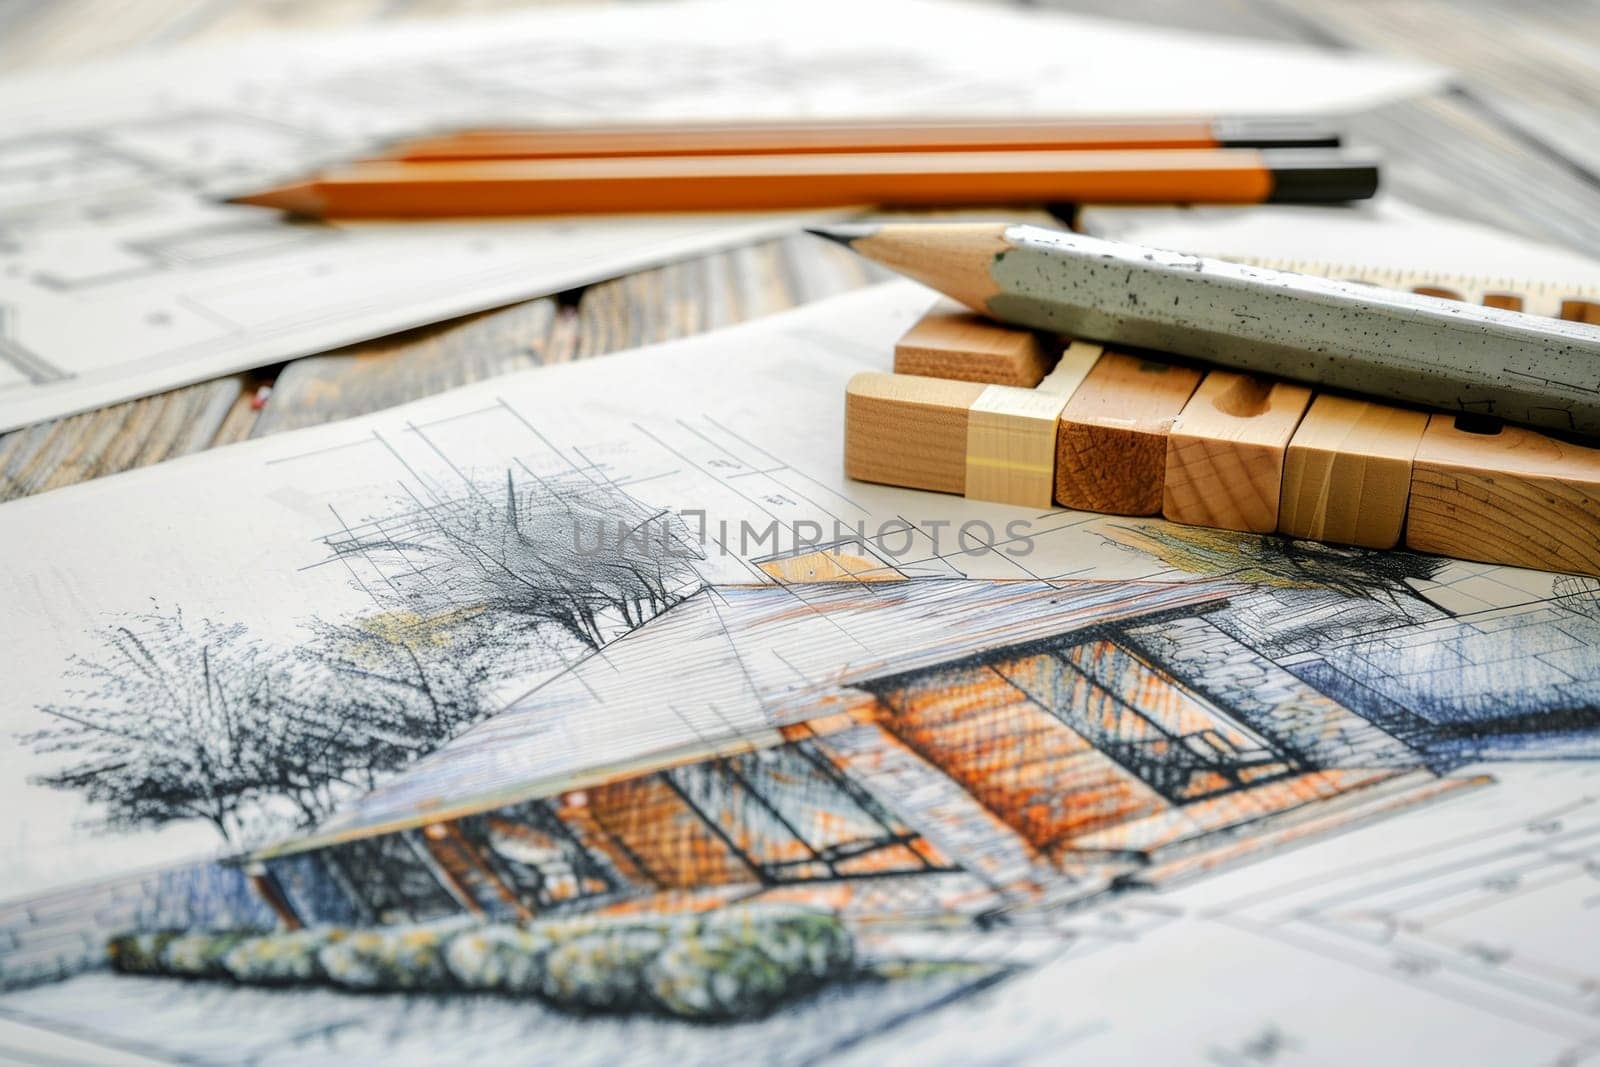 A pencil lies next to intricate drawings on a wooden table, showcasing artistic designs and creative ideas for a project renovation sketch.